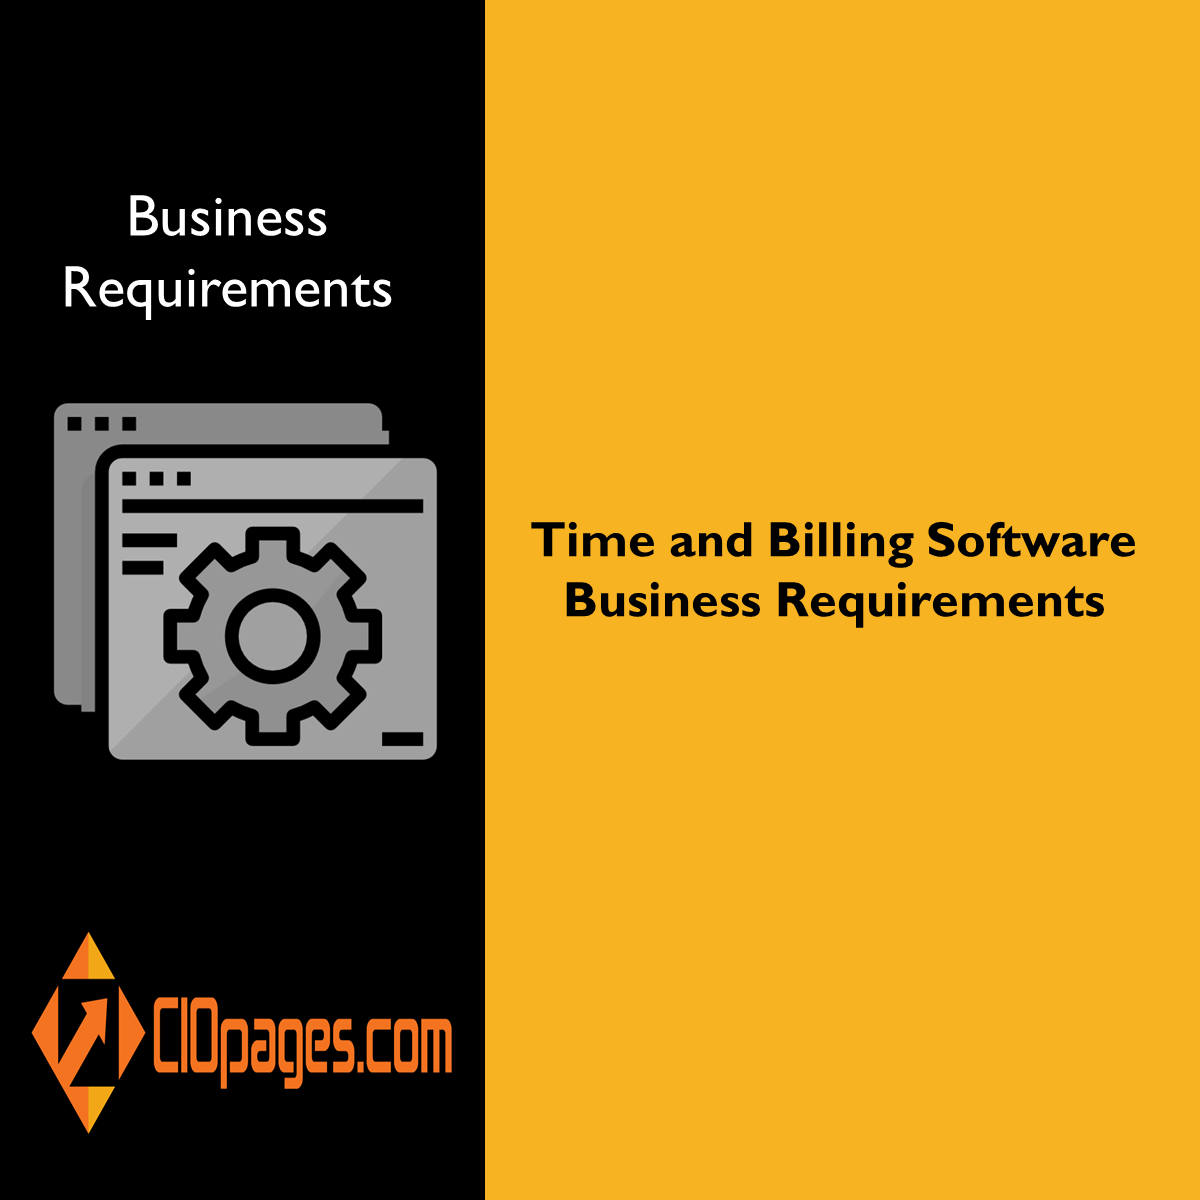 Time and Billing Software Business Requirements